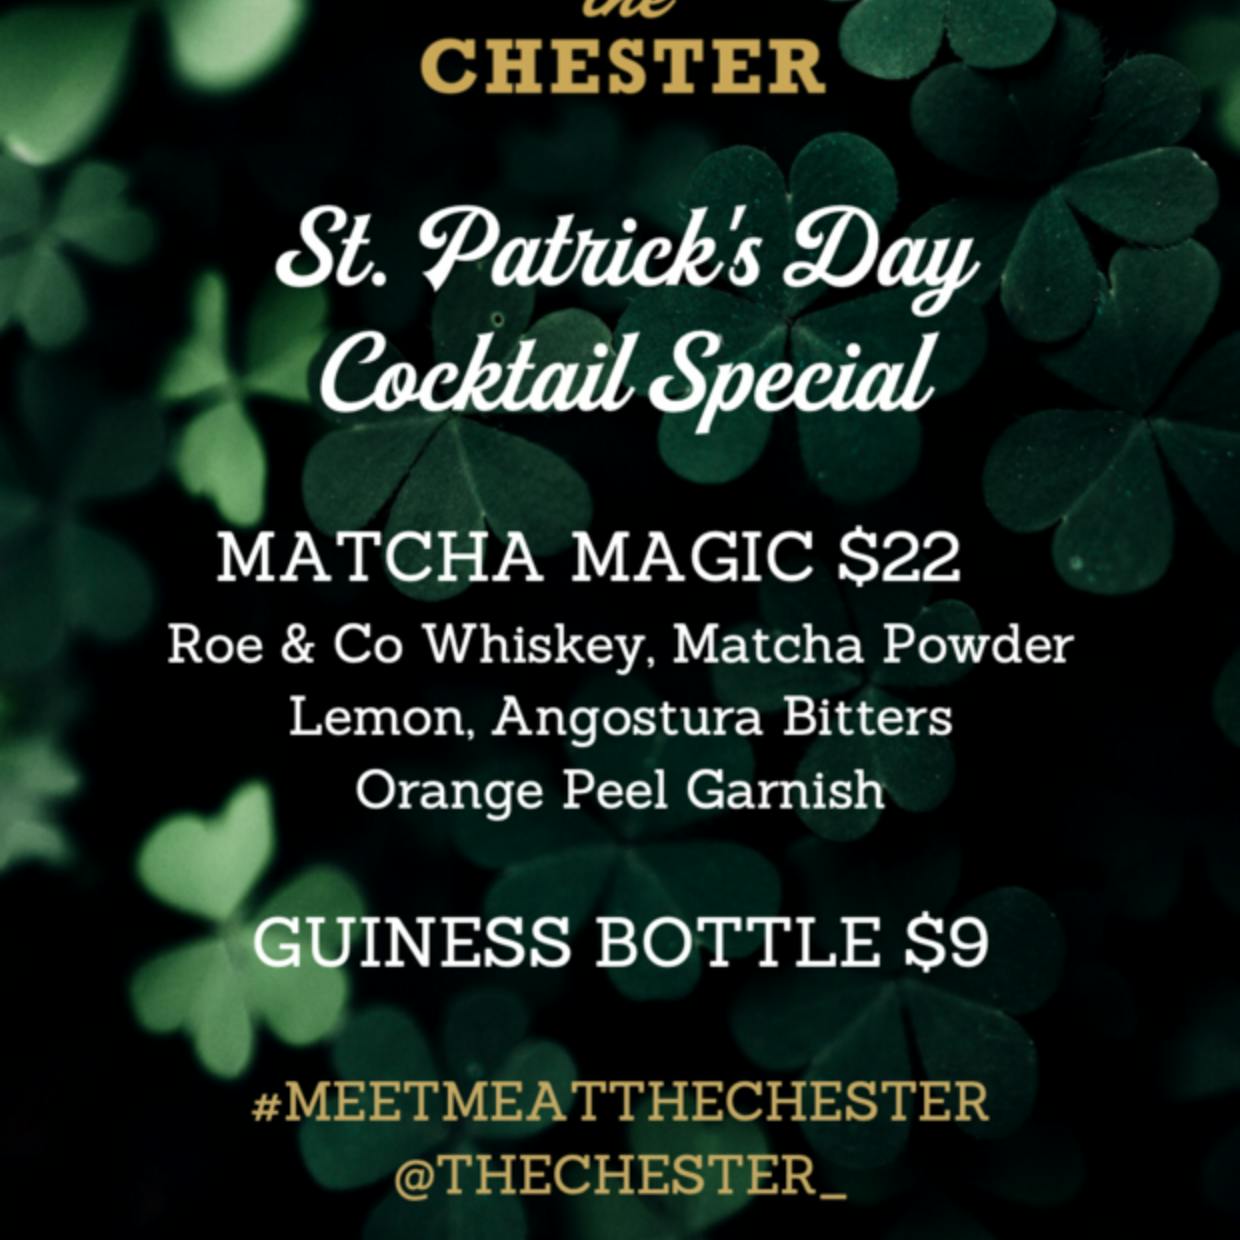 St. Patricks Day at The Chester